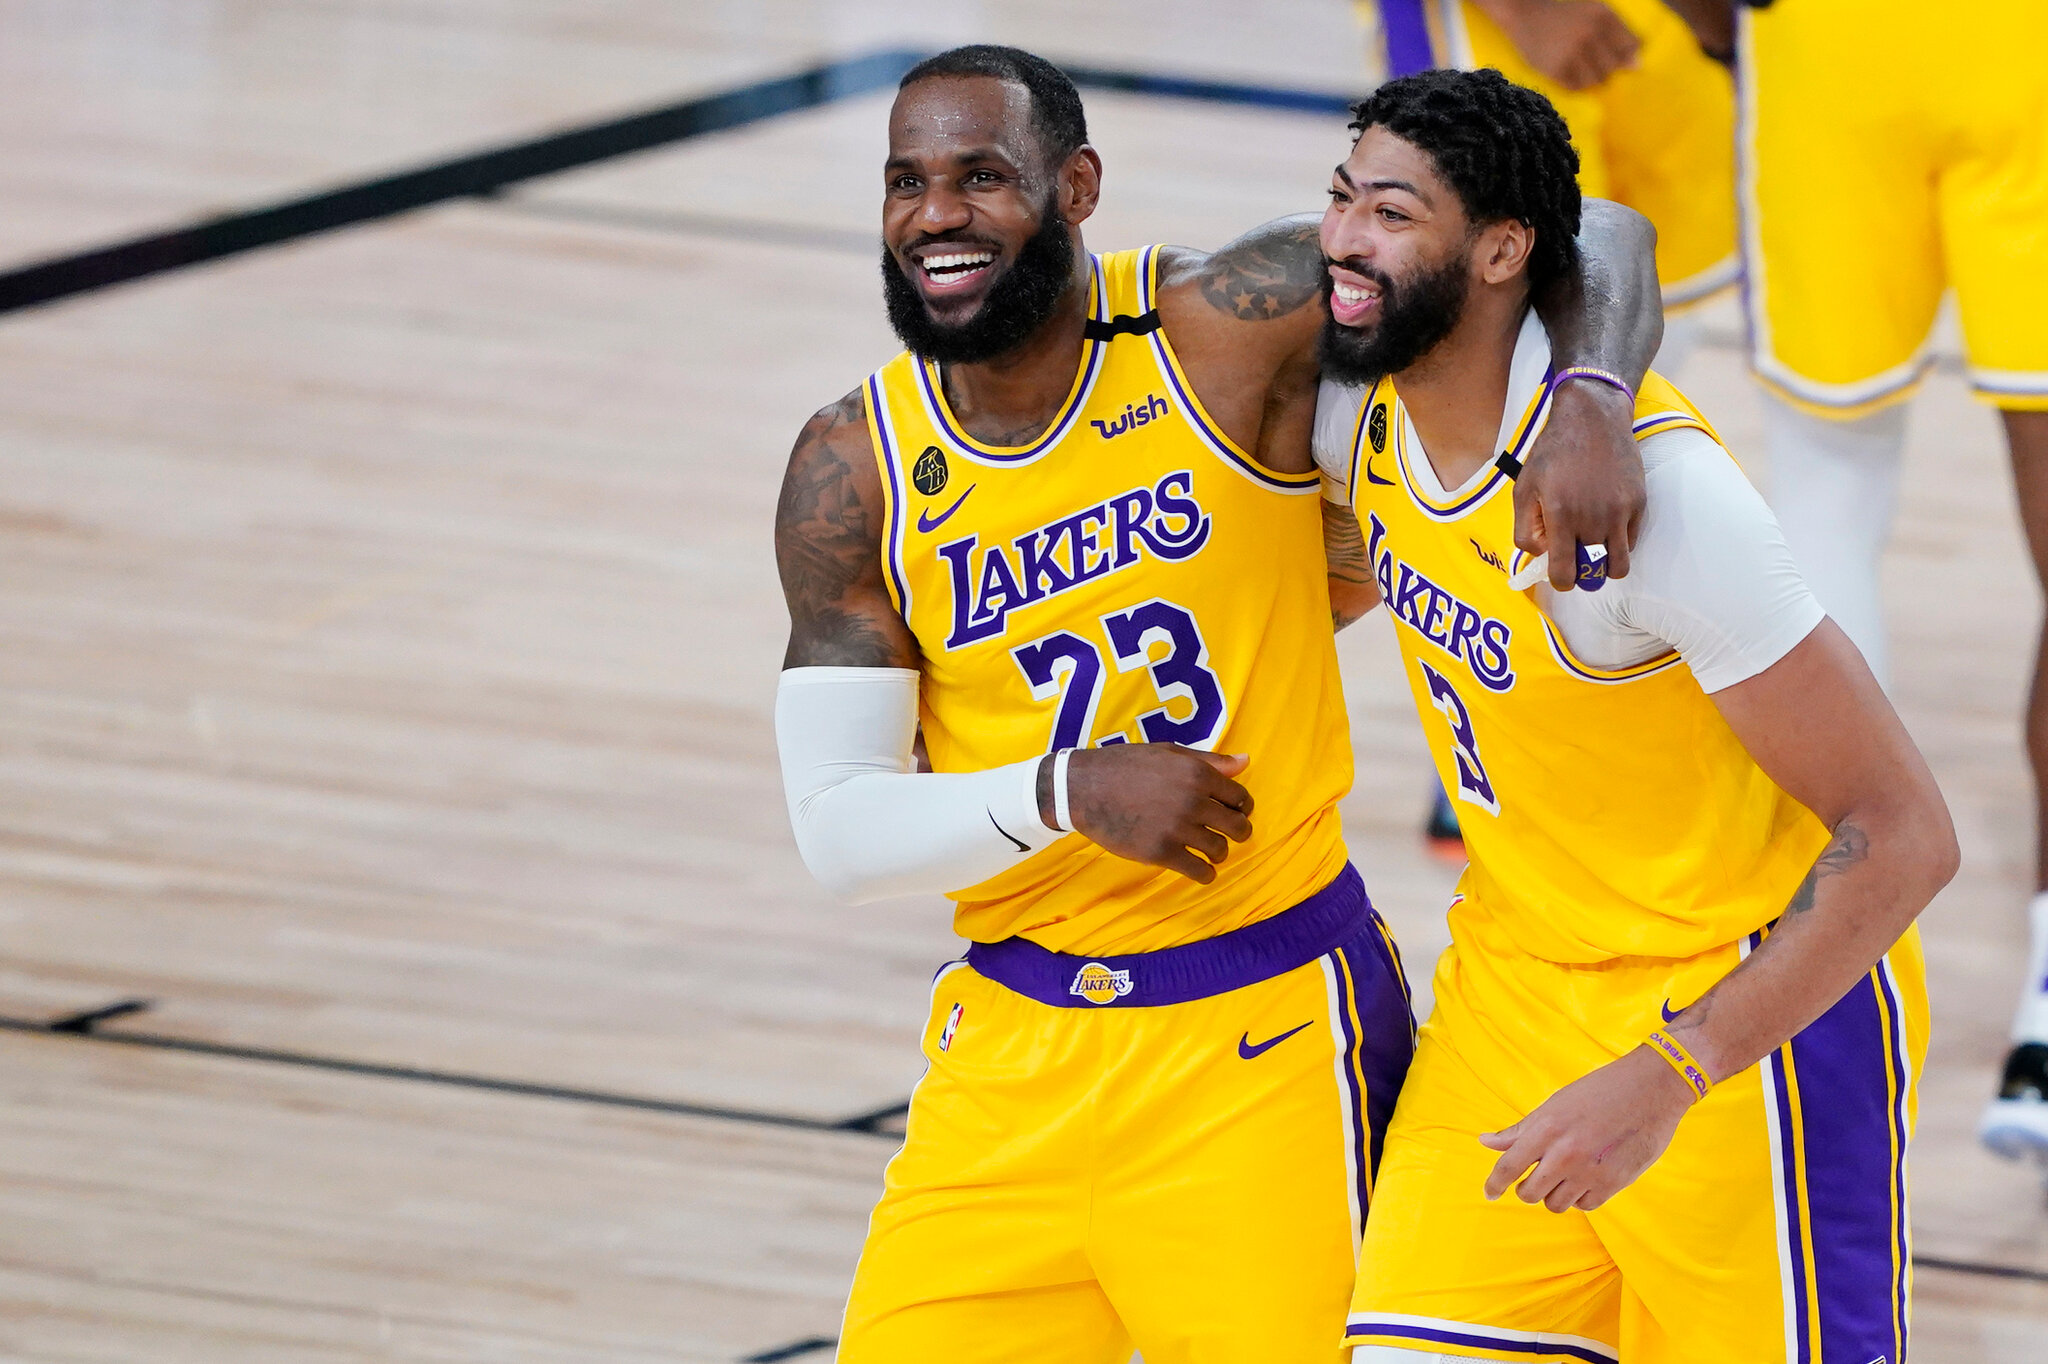 Breaking News Lakers' Bold Decision for 2024 - LeBron, Davis Lead New Star-Studded Lineup